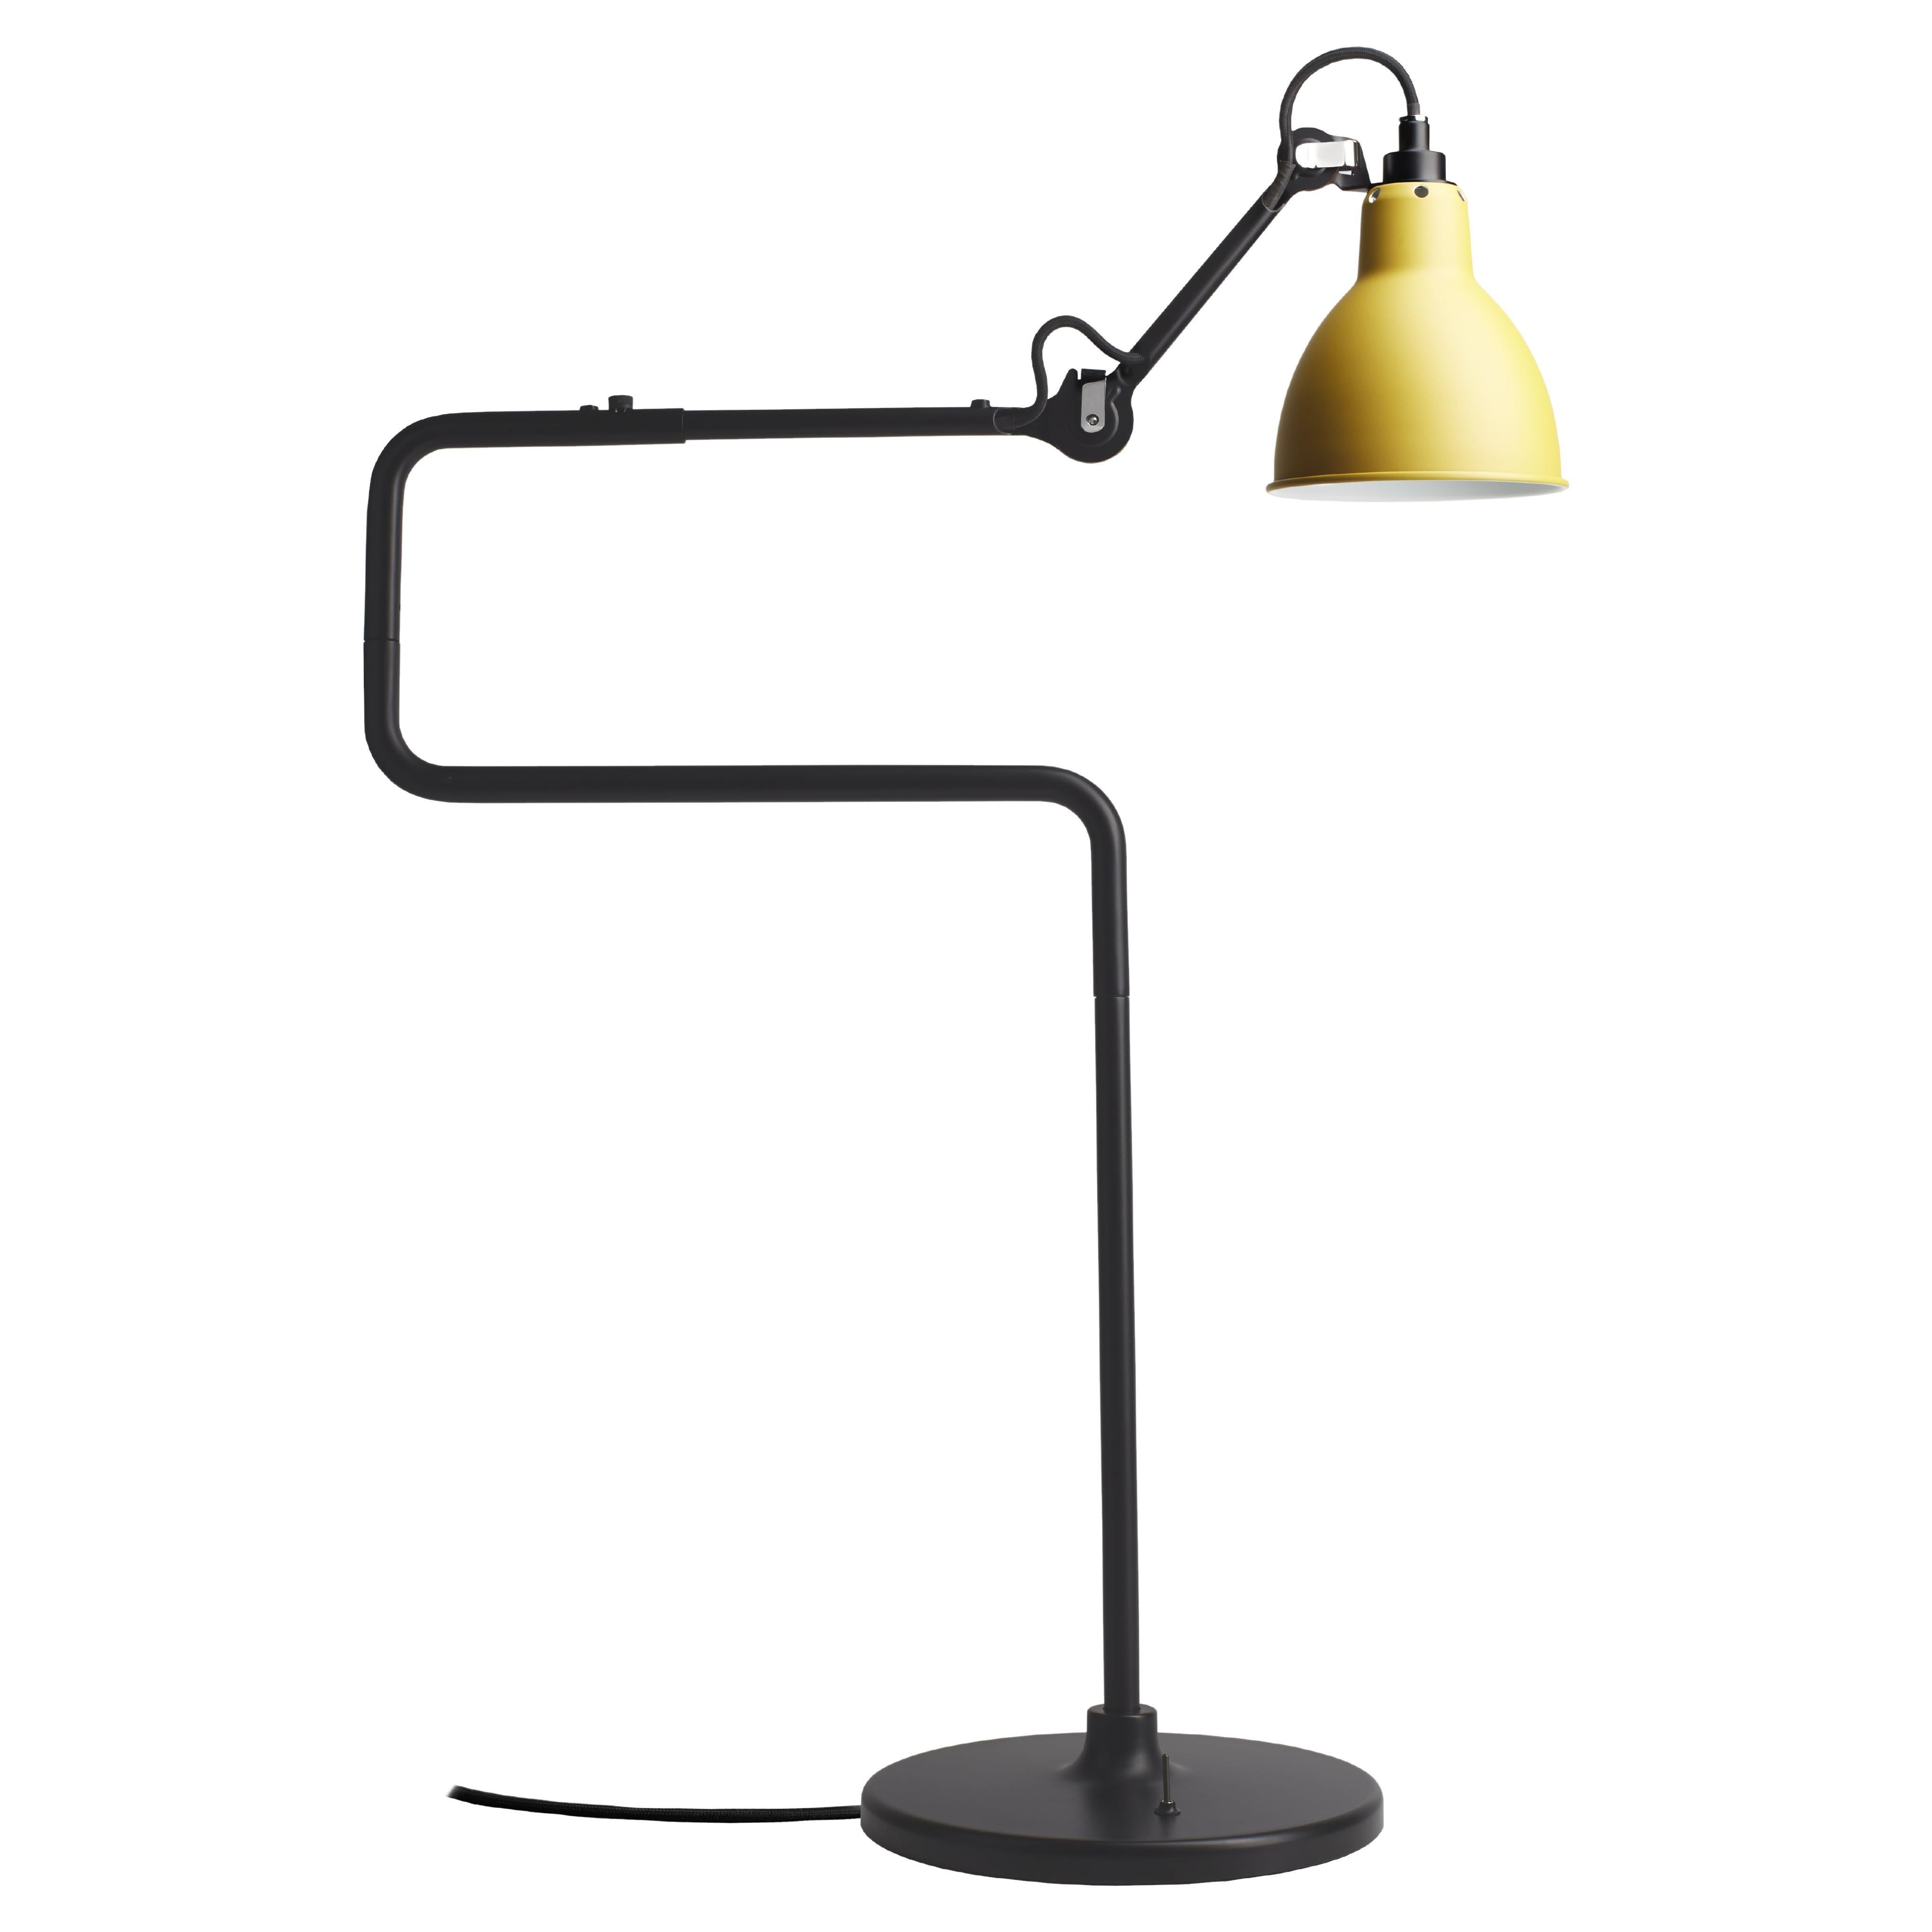 DCW Editions La Lampe Gras N°317 Table Lamp in Black Arm with Yellow Shade For Sale